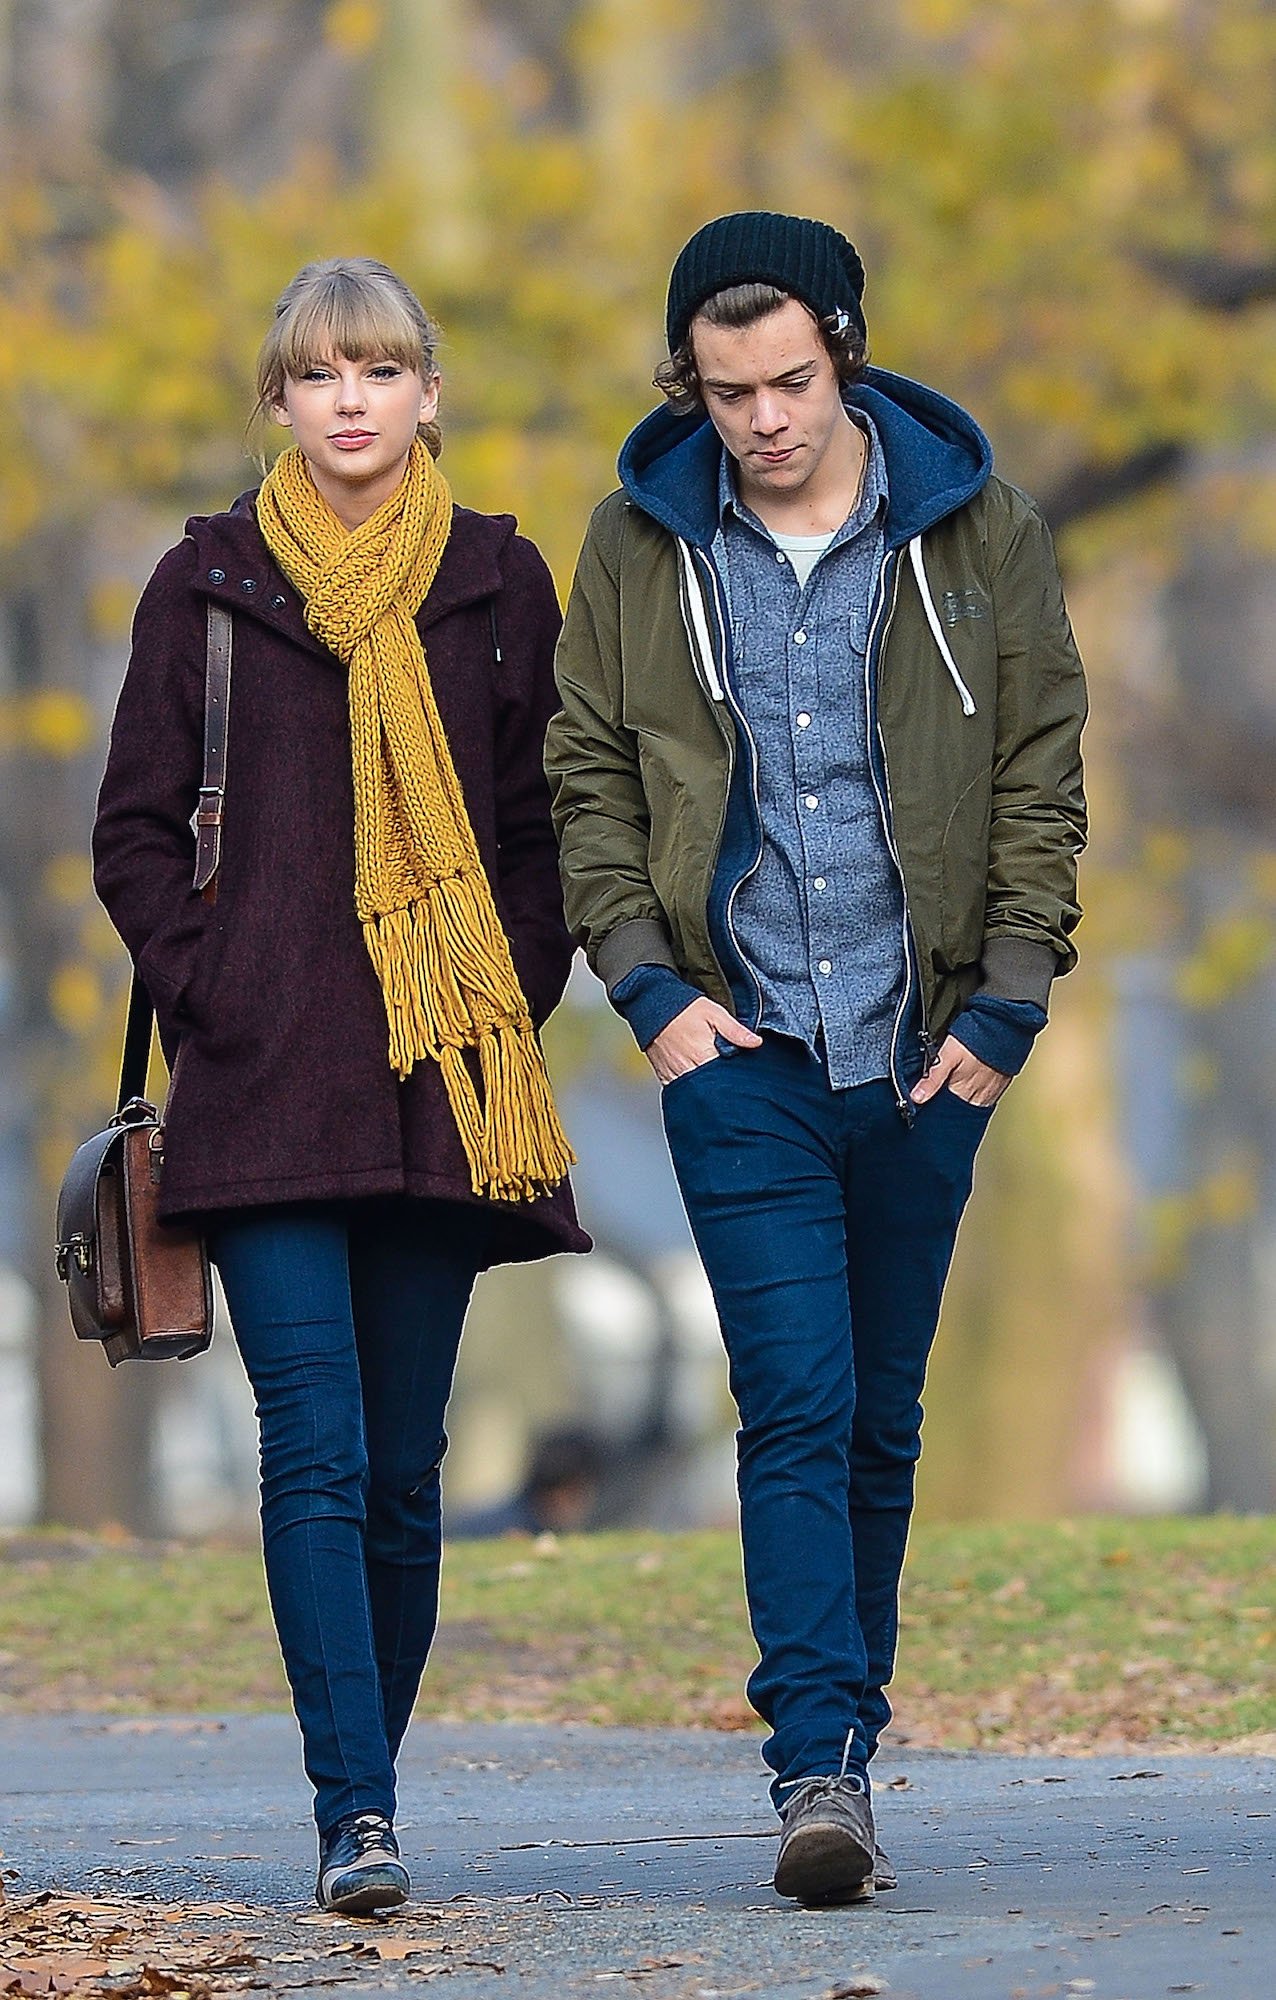 Taylor Swift and Harry Styles walking around Central Park, December 02, 2012.